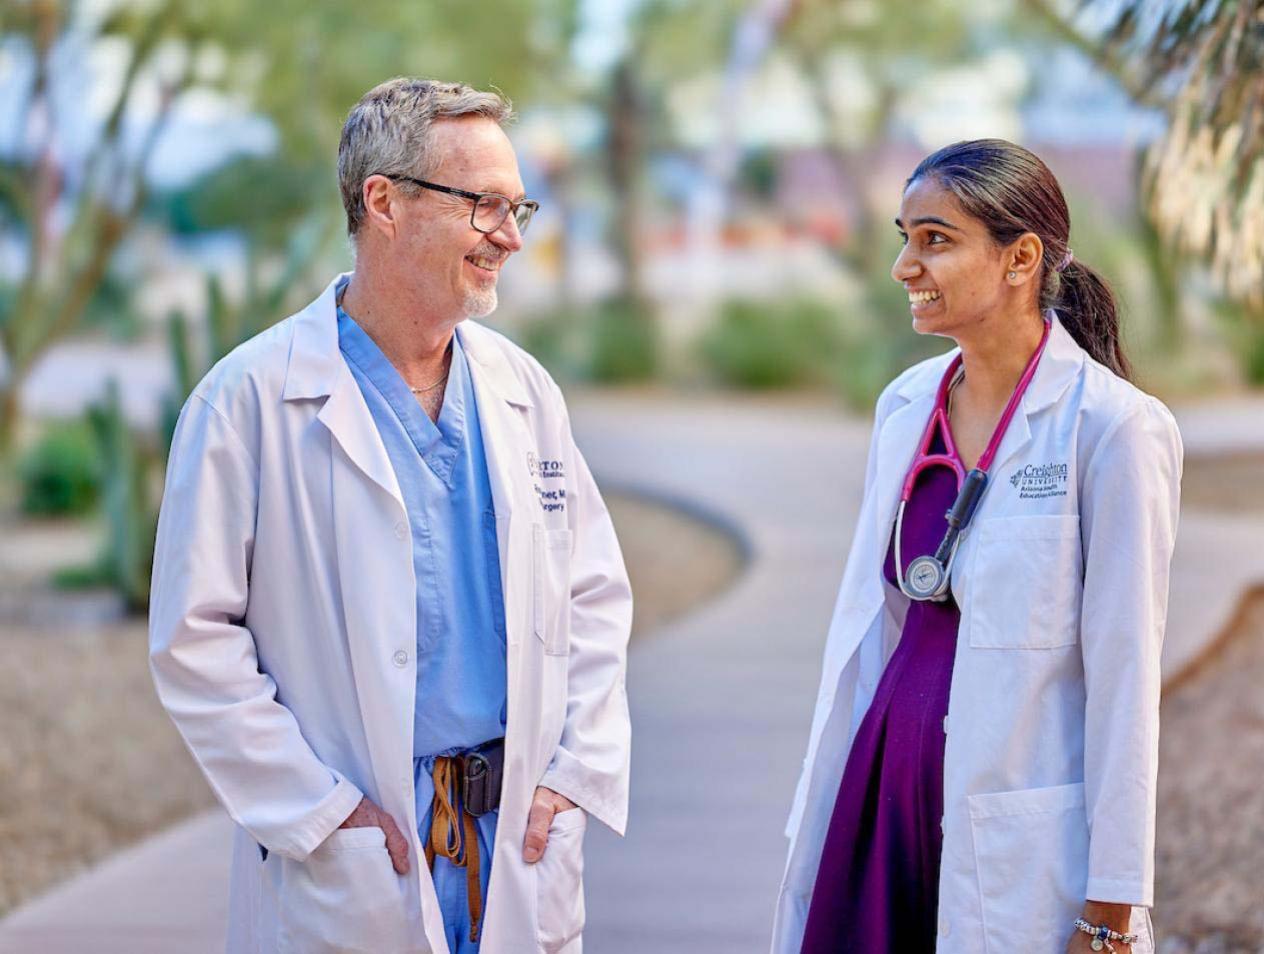 Doctor talking with resident on campus.